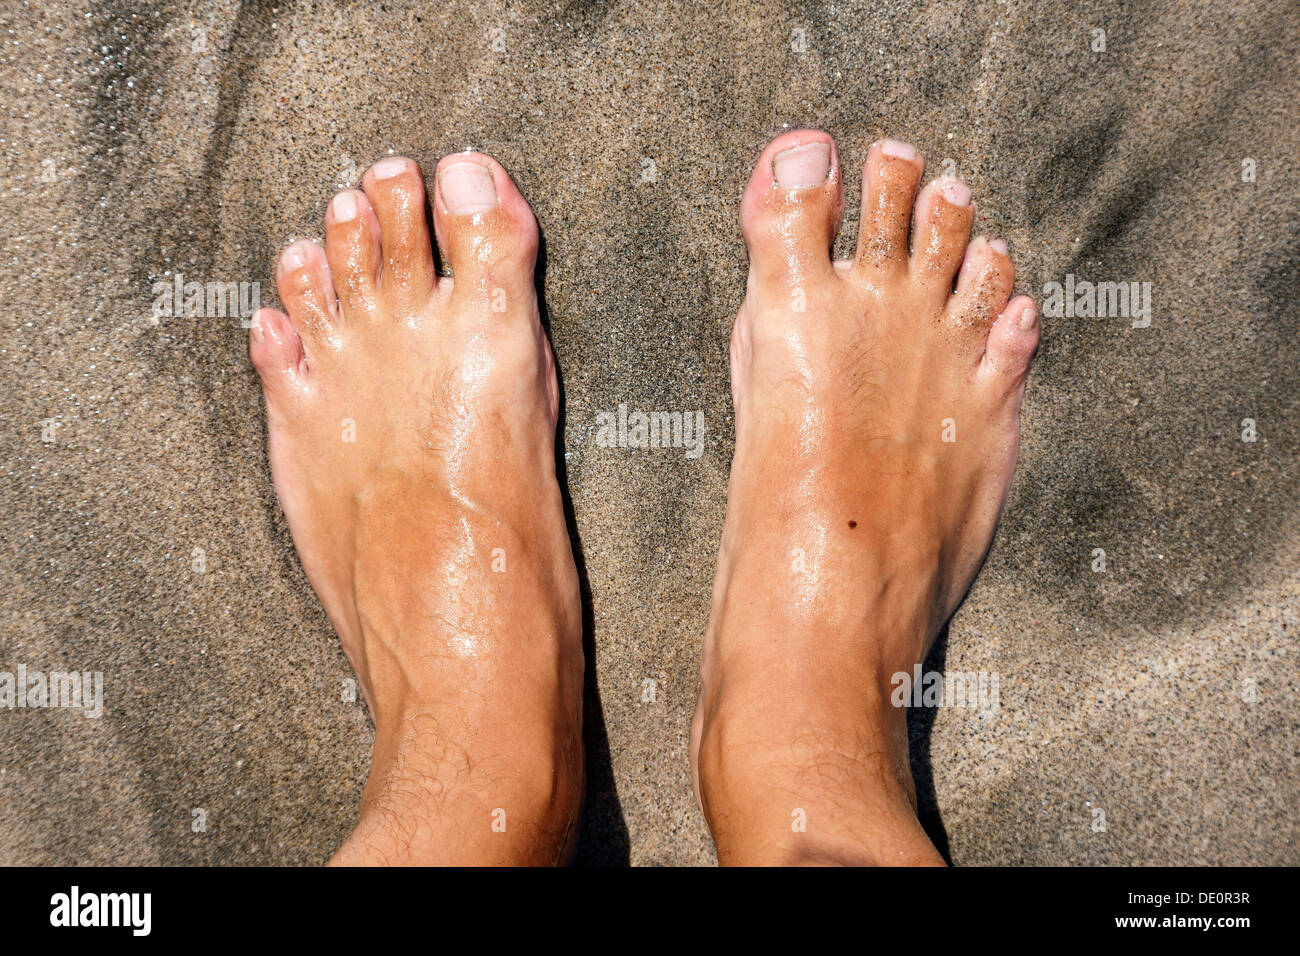 Feet on a beach, being lapped by the sea Stock Photo